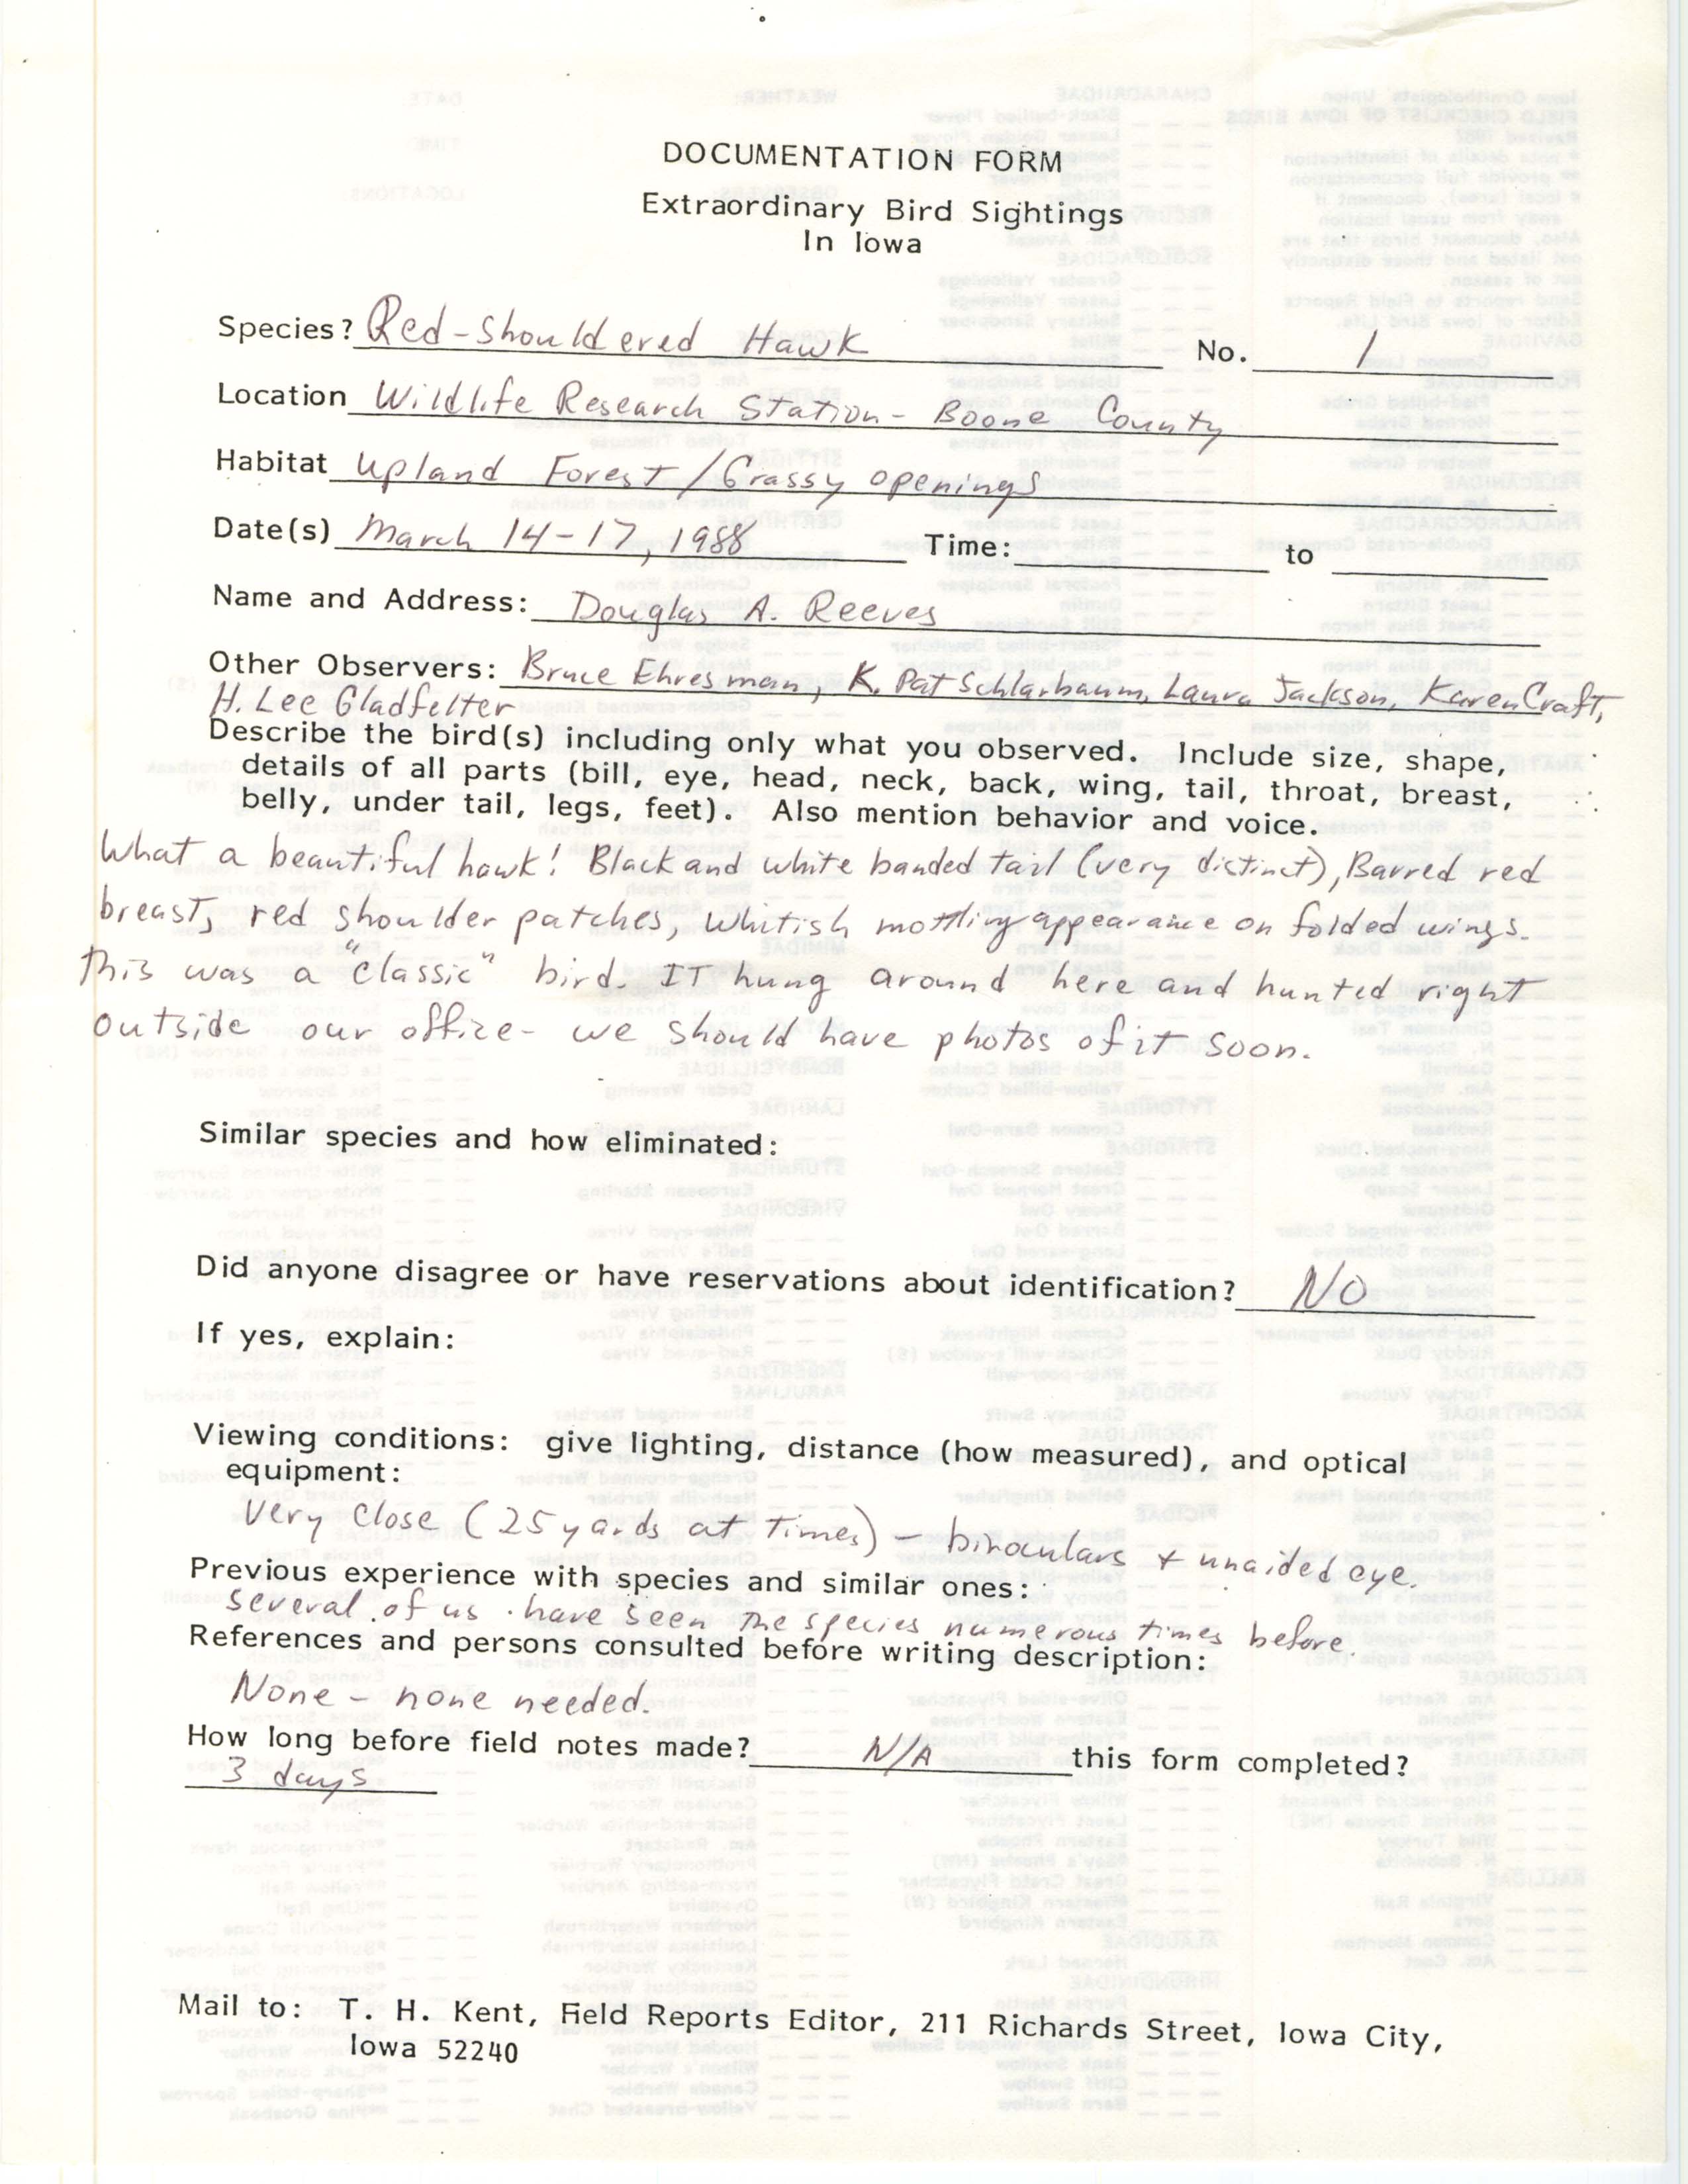 Rare bird documentation form for Red-Shouldered Hawk at Wildlife Research Station in Boone County in 1988